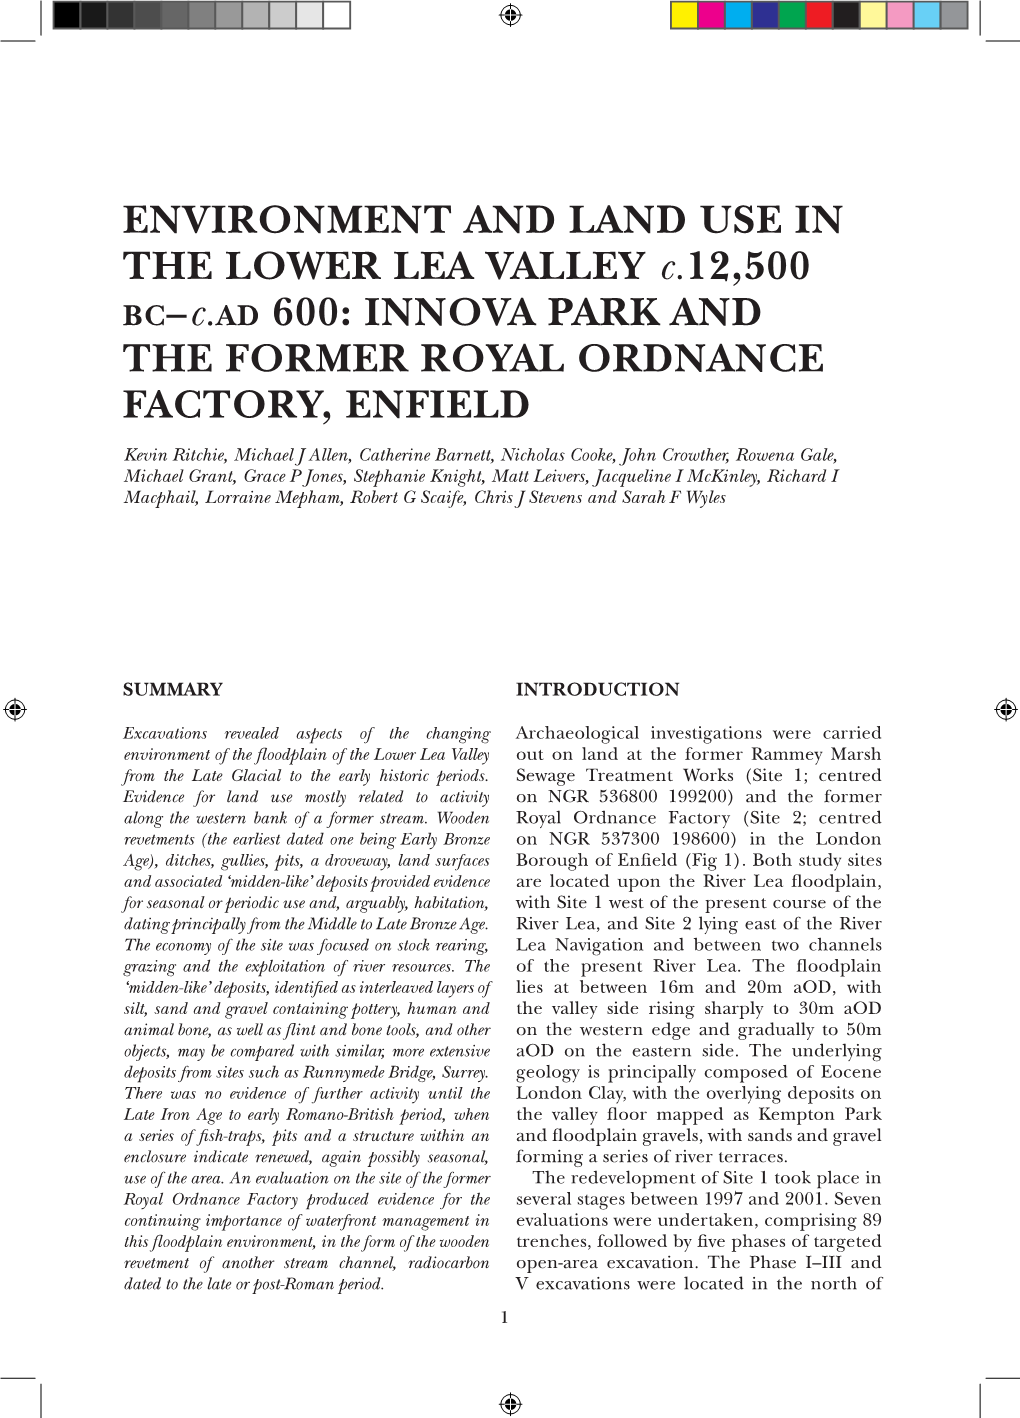 Environment and Land Use in the Lower Lea Valley C. 12500 BC